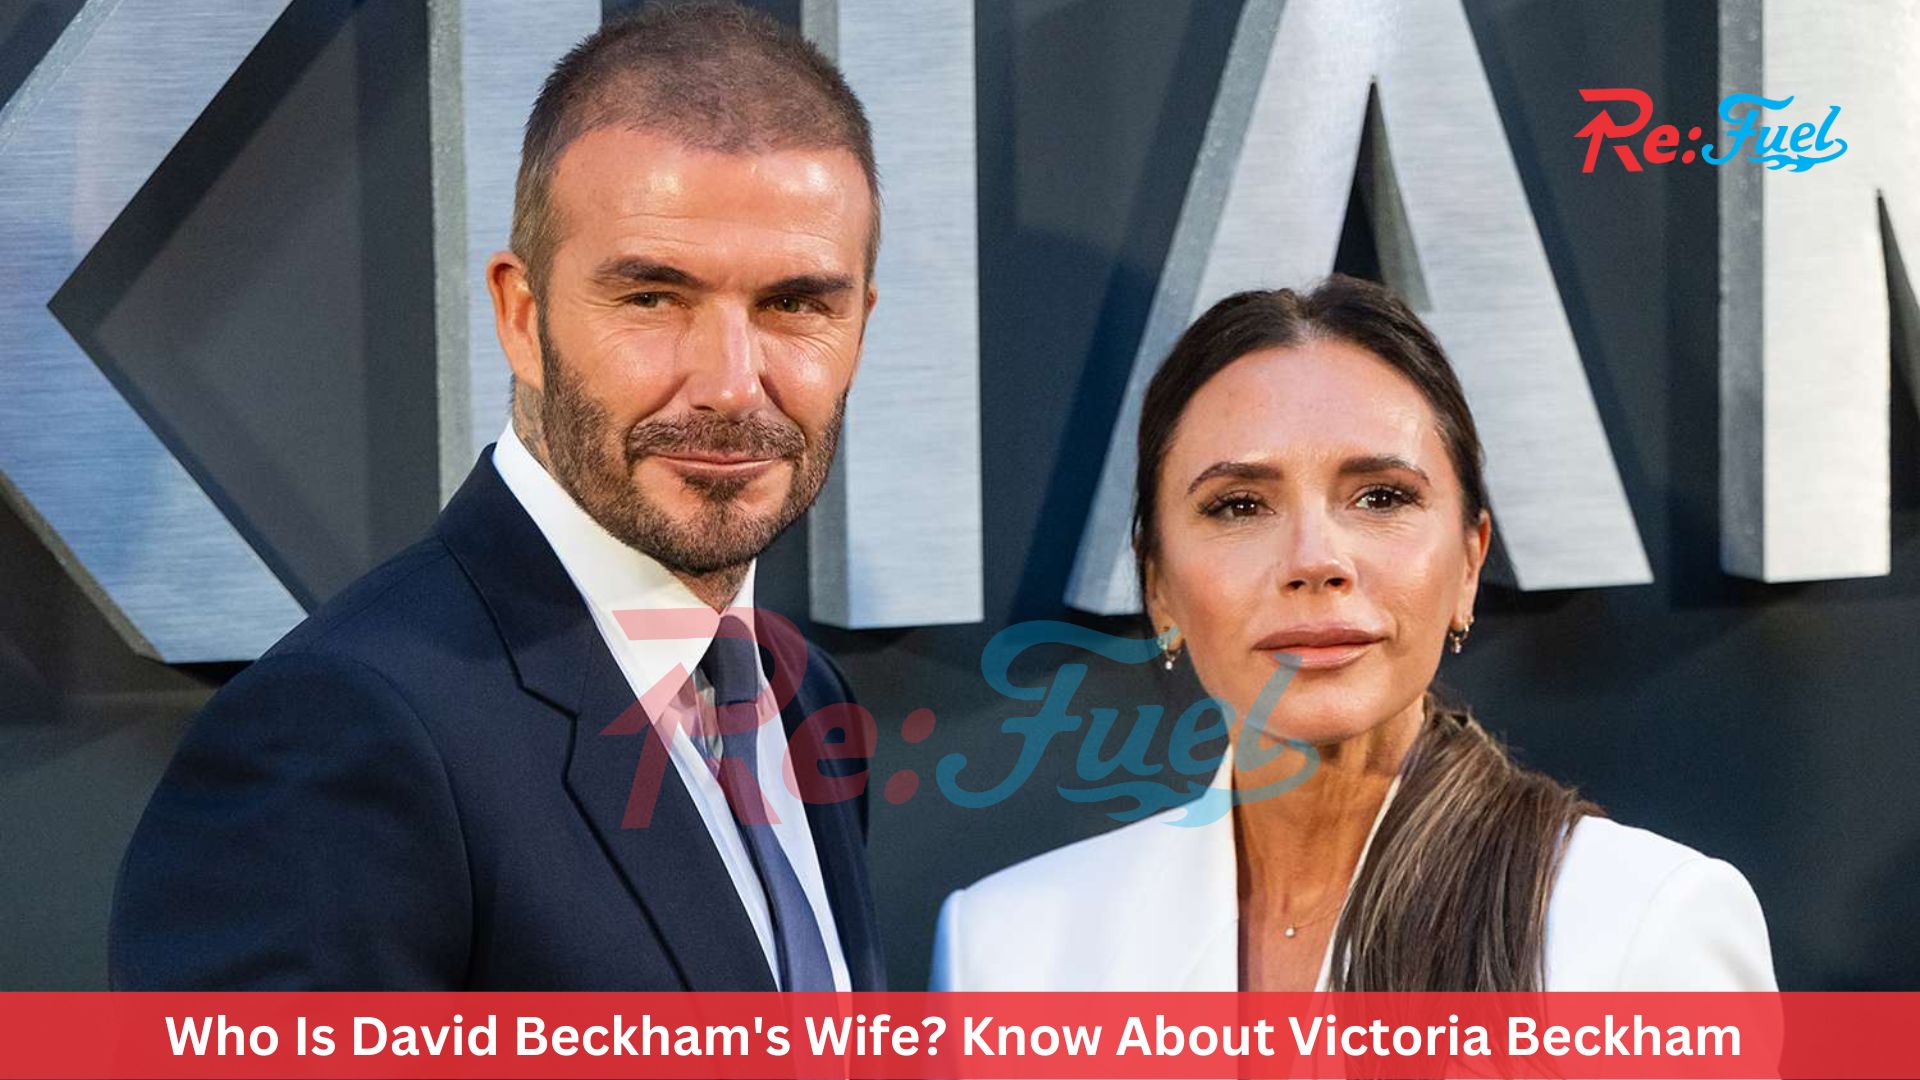 Who Is David Beckham's Wife? Know About Victoria Beckham